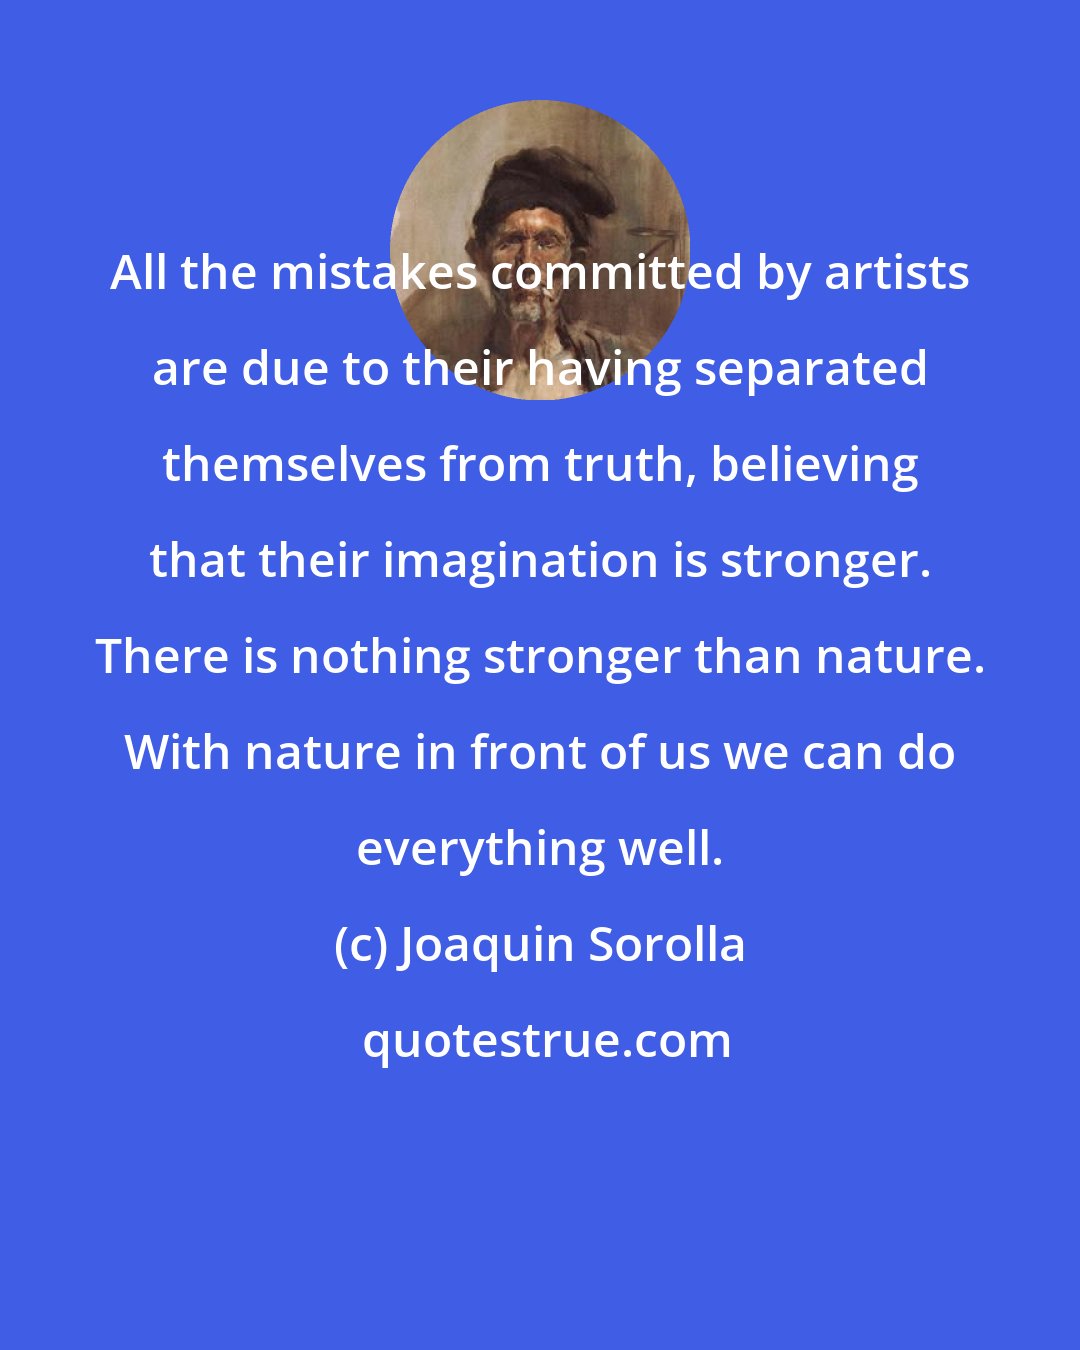 Joaquin Sorolla: All the mistakes committed by artists are due to their having separated themselves from truth, believing that their imagination is stronger. There is nothing stronger than nature. With nature in front of us we can do everything well.